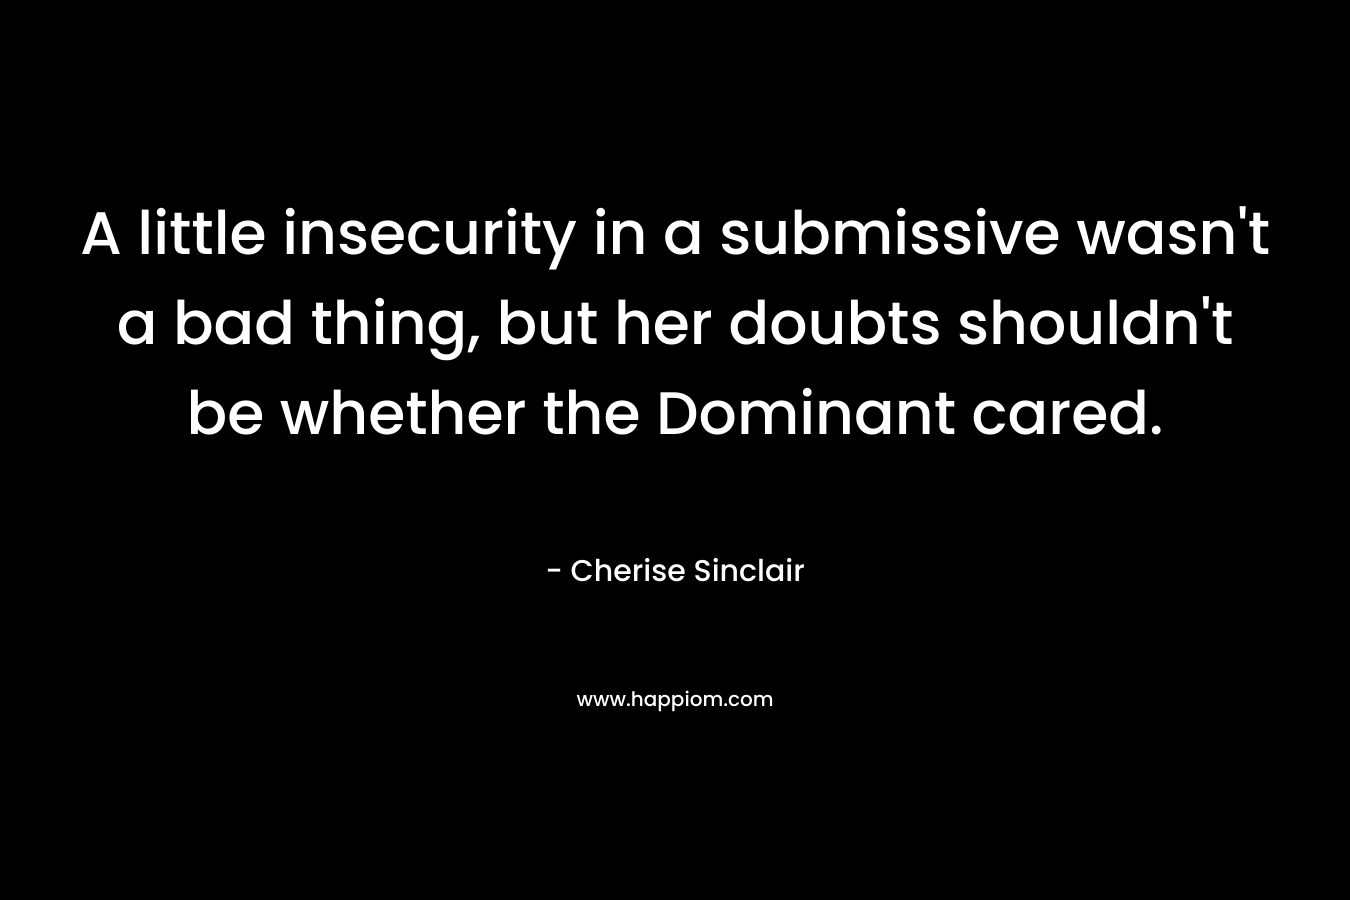 A little insecurity in a submissive wasn’t a bad thing, but her doubts shouldn’t be whether the Dominant cared. – Cherise Sinclair